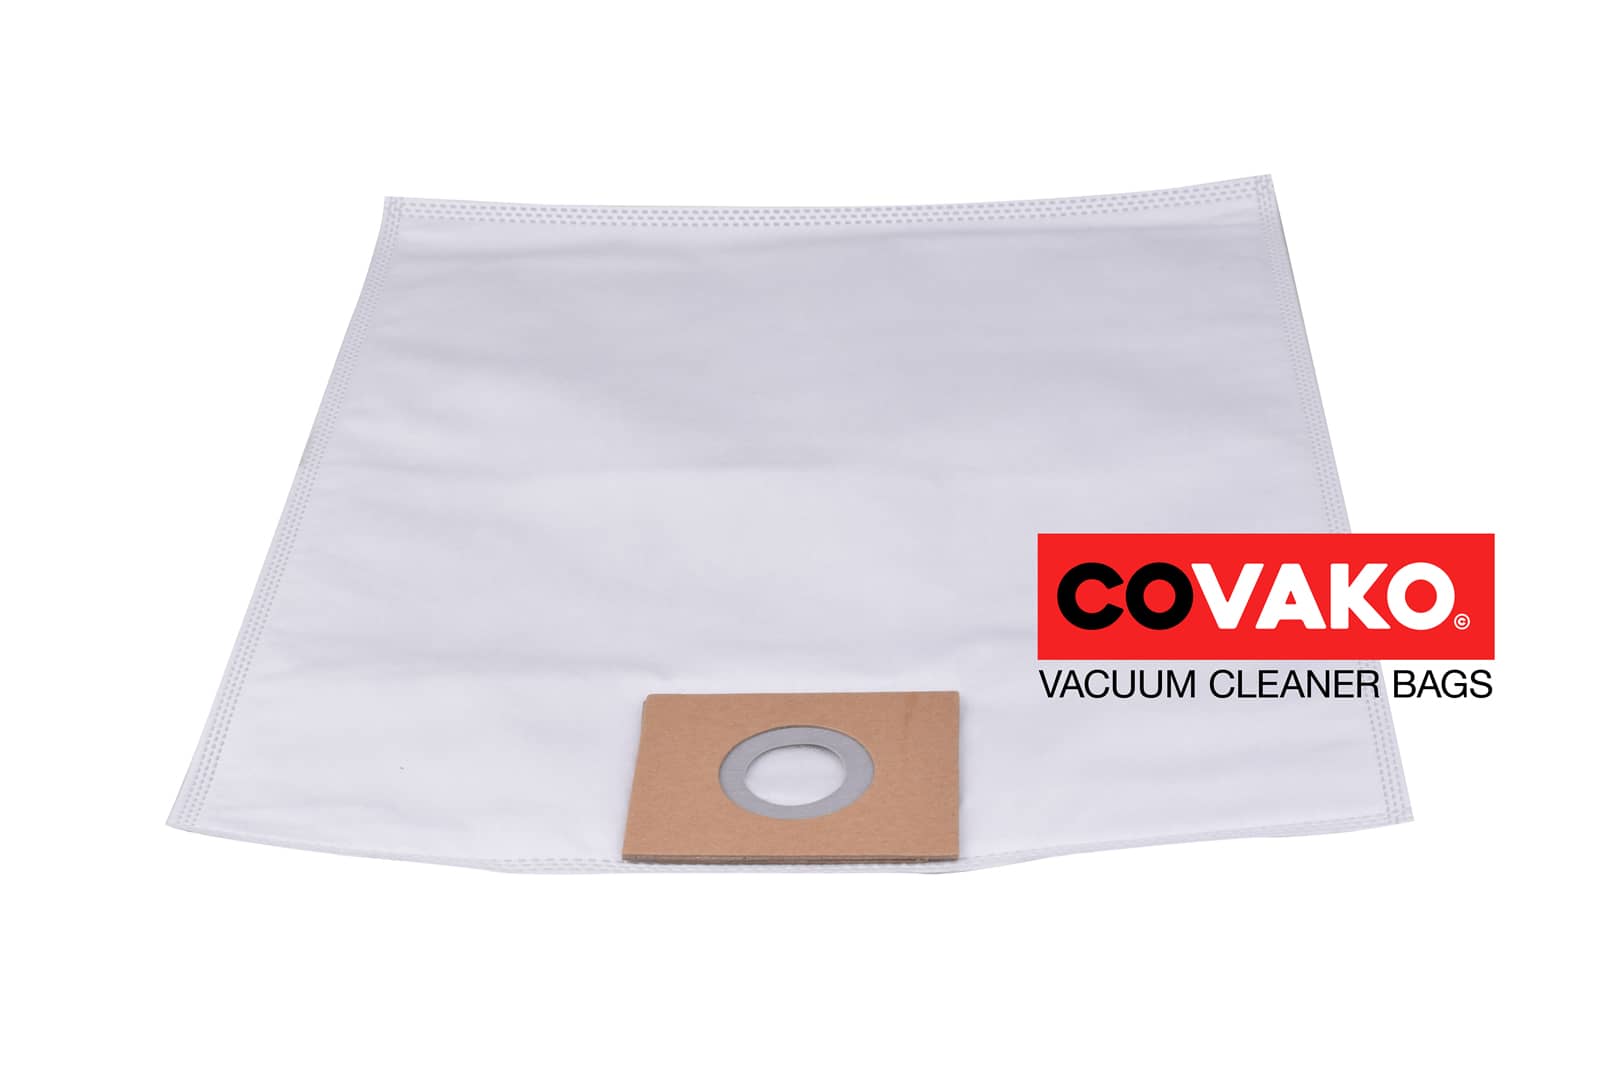 I-vac Dryver 15R / Synthesis - I-vac vacuum cleaner bags